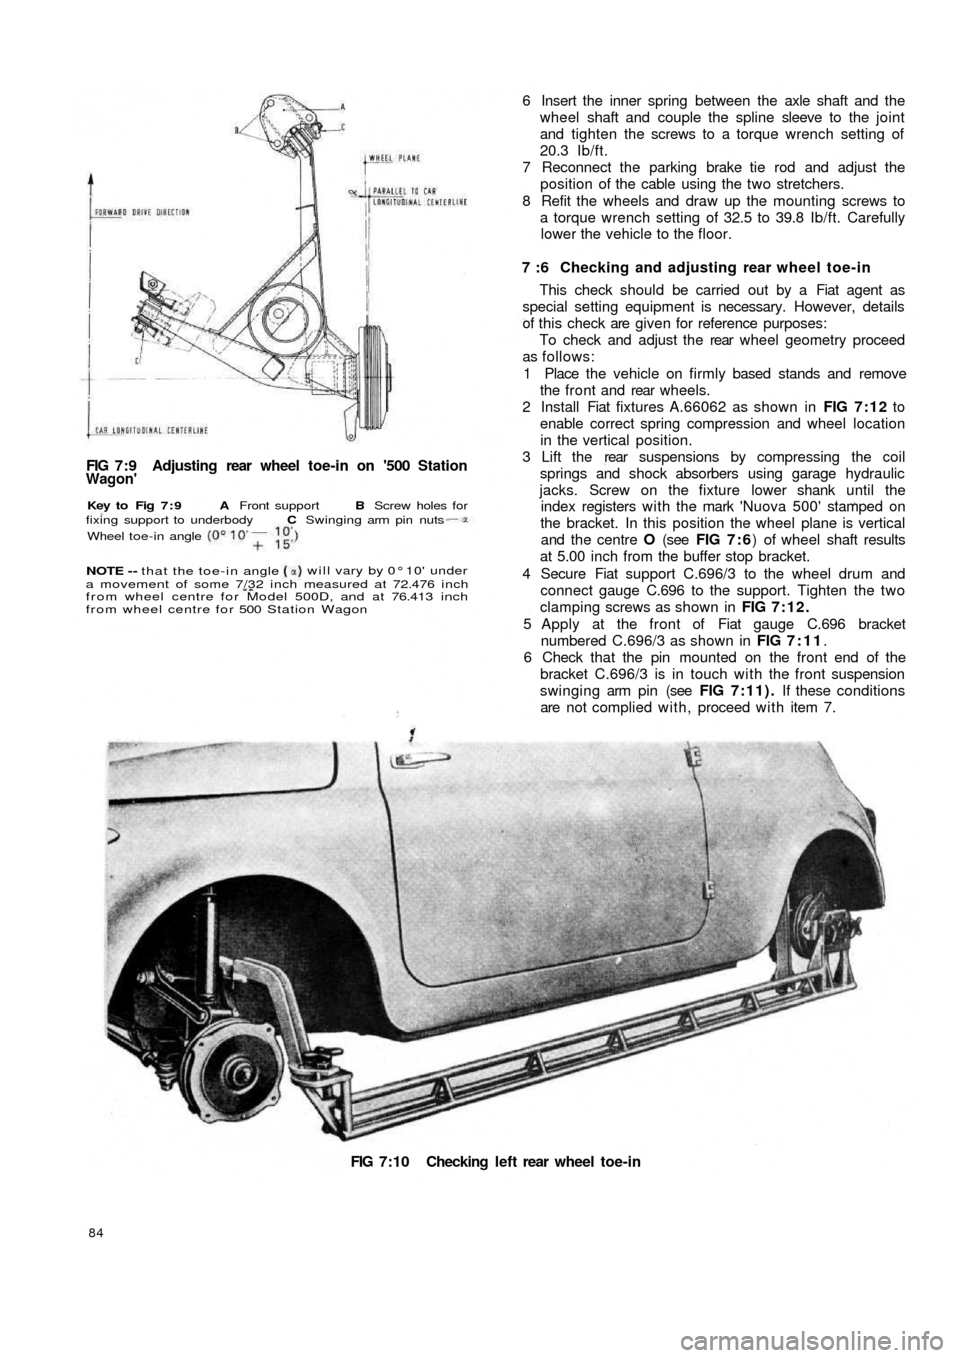 FIAT 500 1970 1.G Workshop Manual FIG 7:9  Adjusting  rear  wheel toe-in on 500 StationWagon
FIG 7:10 Checking left rear wheel toe-in
84
6 Insert the inner spring between the axle shaft and the
wheel shaft and couple the spline slee